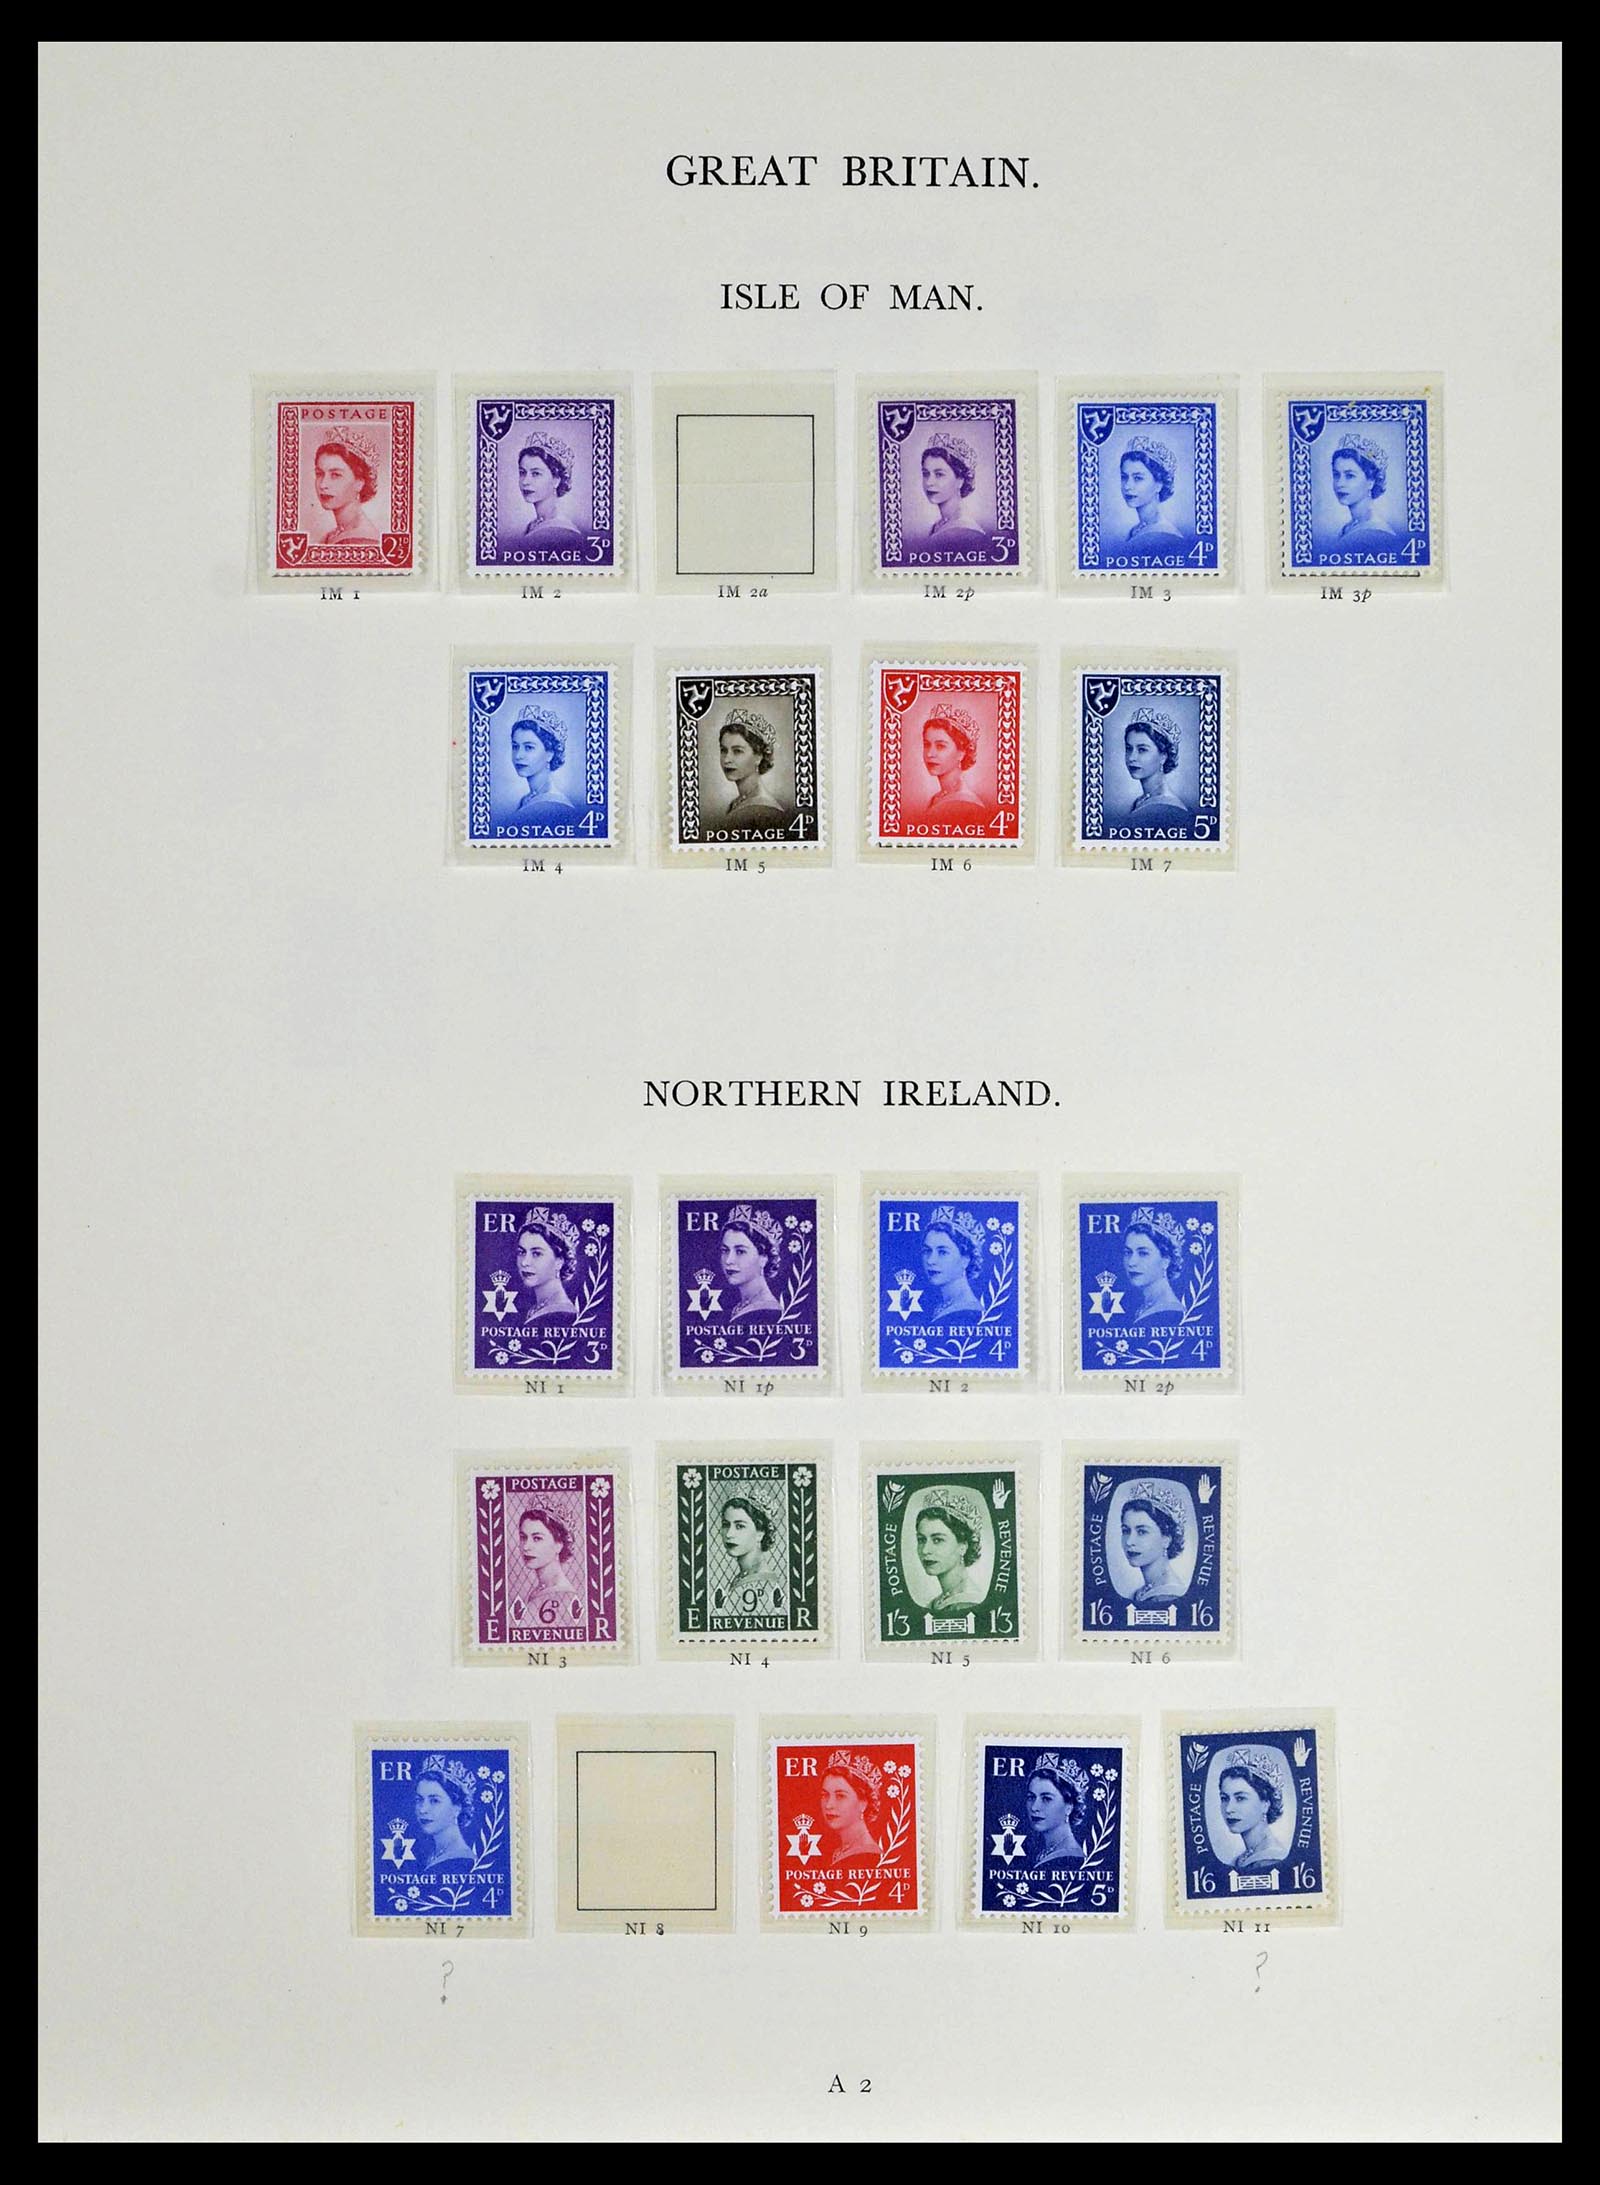 39025 0144 - Stamp collection 39025 Great Britain specialised 1840-1990.